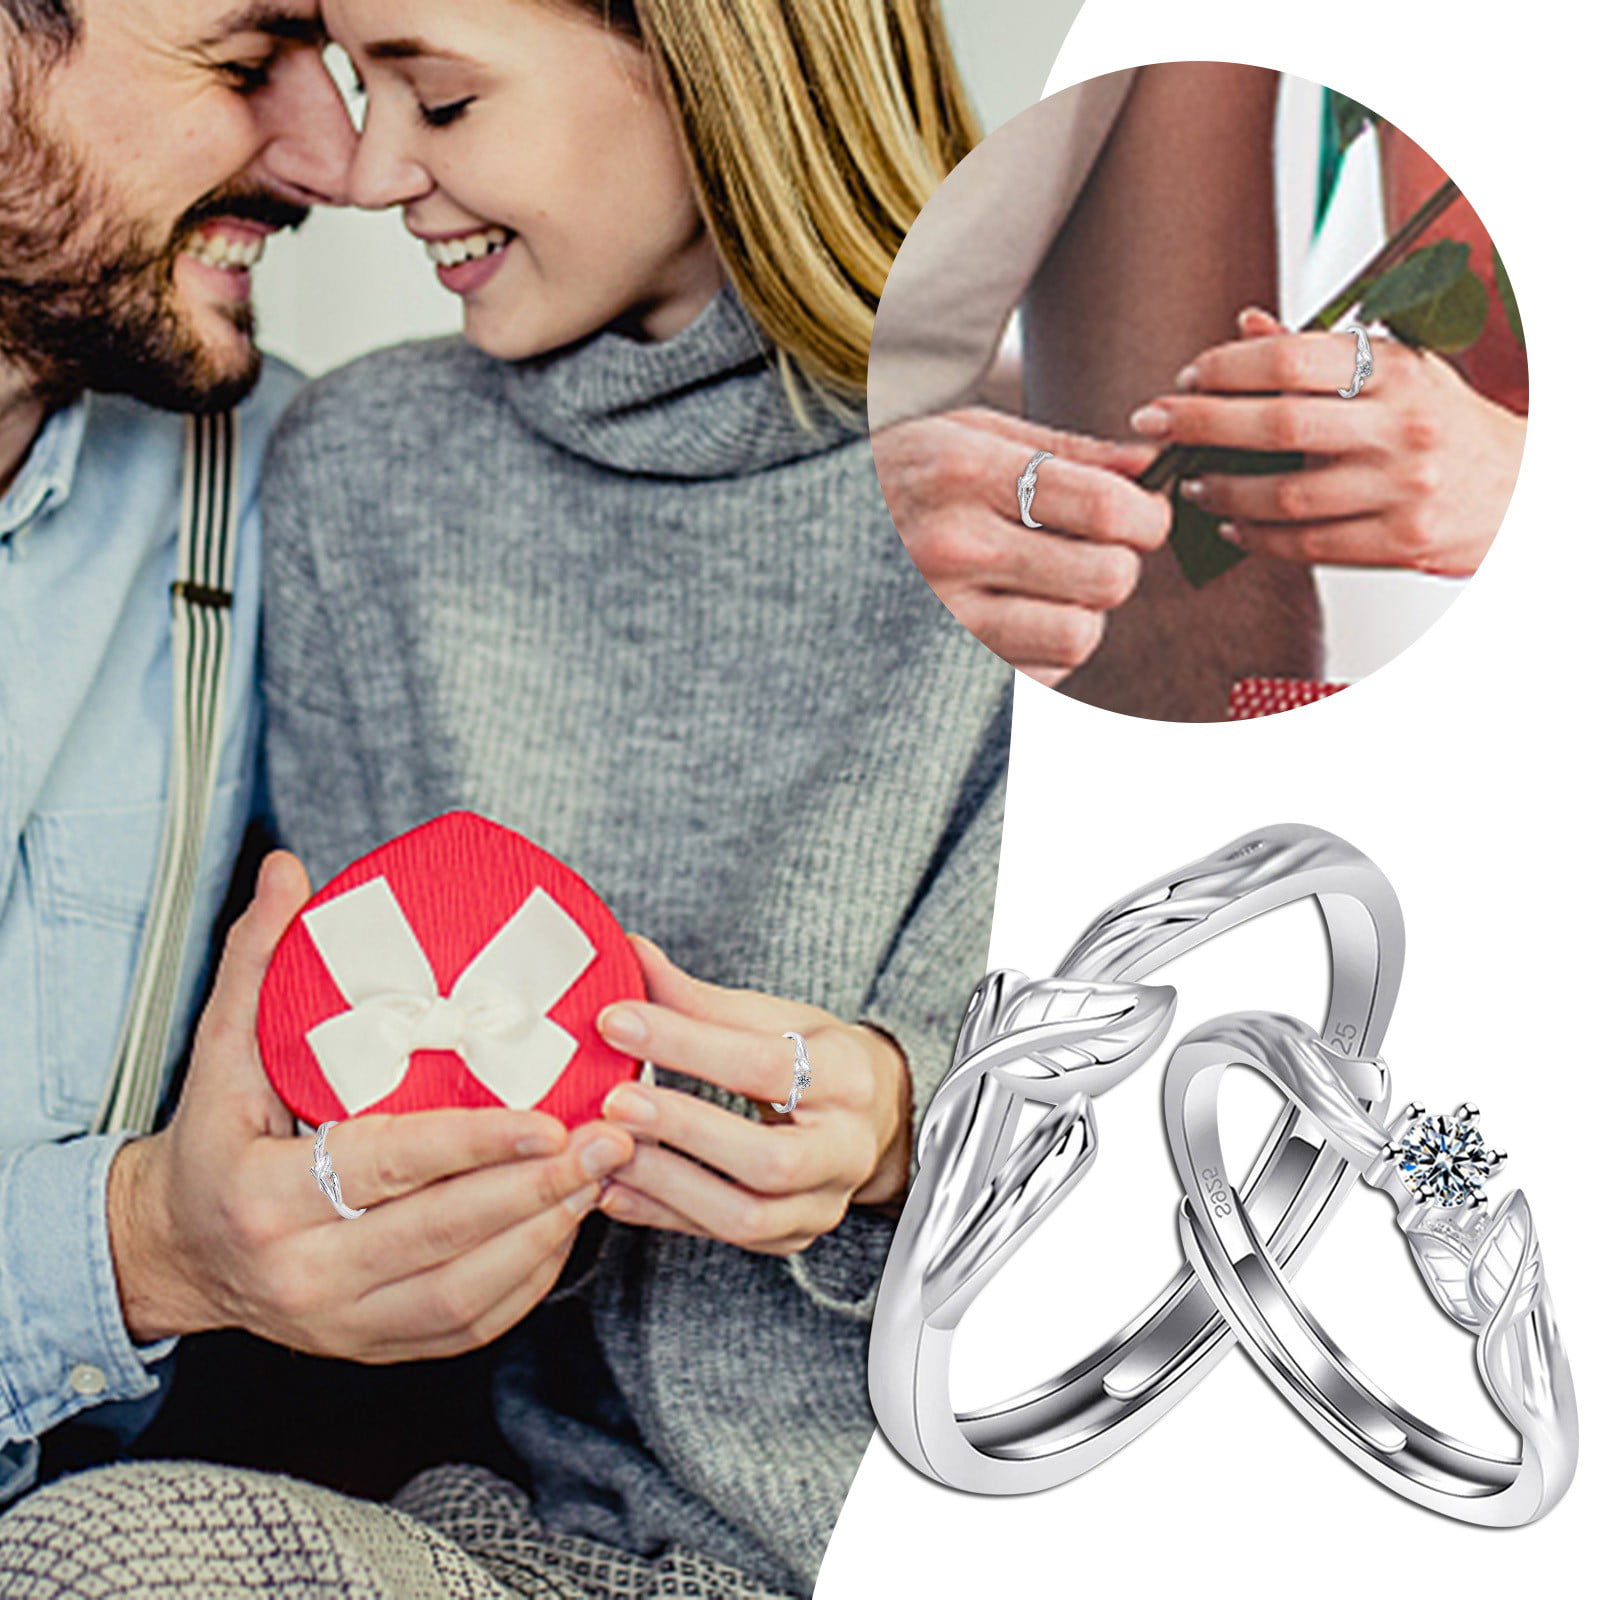 Interlocking Couple Promise Rings Set for Women and Men, Simple Cute  Wedding Ring Band in 925 Sterling Silver, Matching His and Hers Jewelry for  Couples [MR-1277] - $65.00 : iDream Jewelry